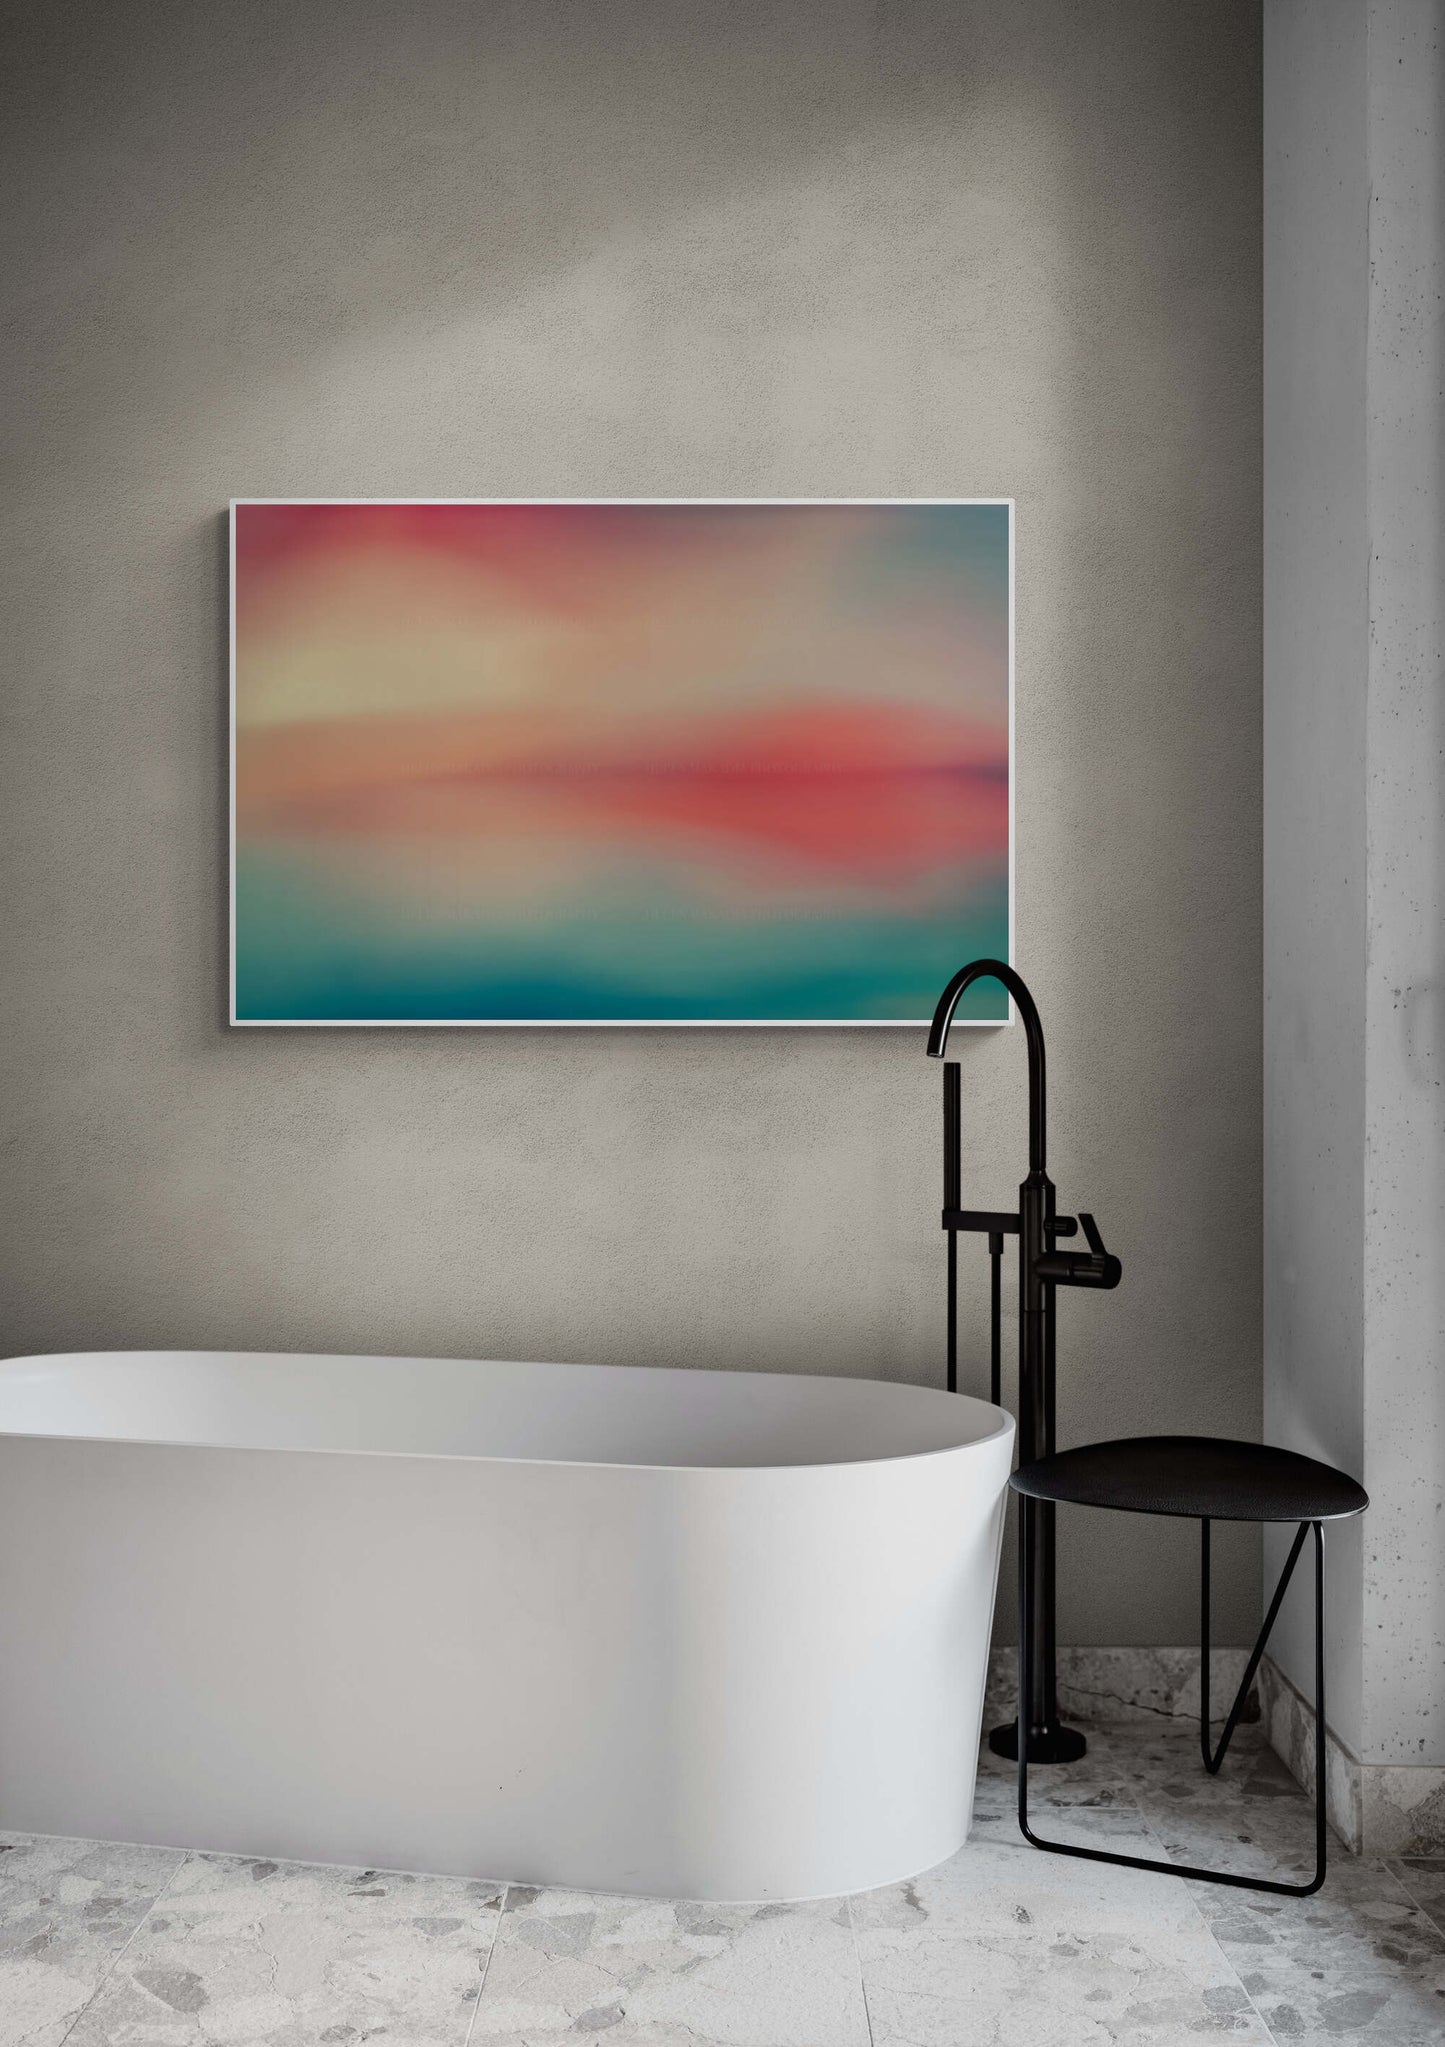 Abstract reflects of blues, greens, teals and coral and peach through long exposure as wall art in a bathroom